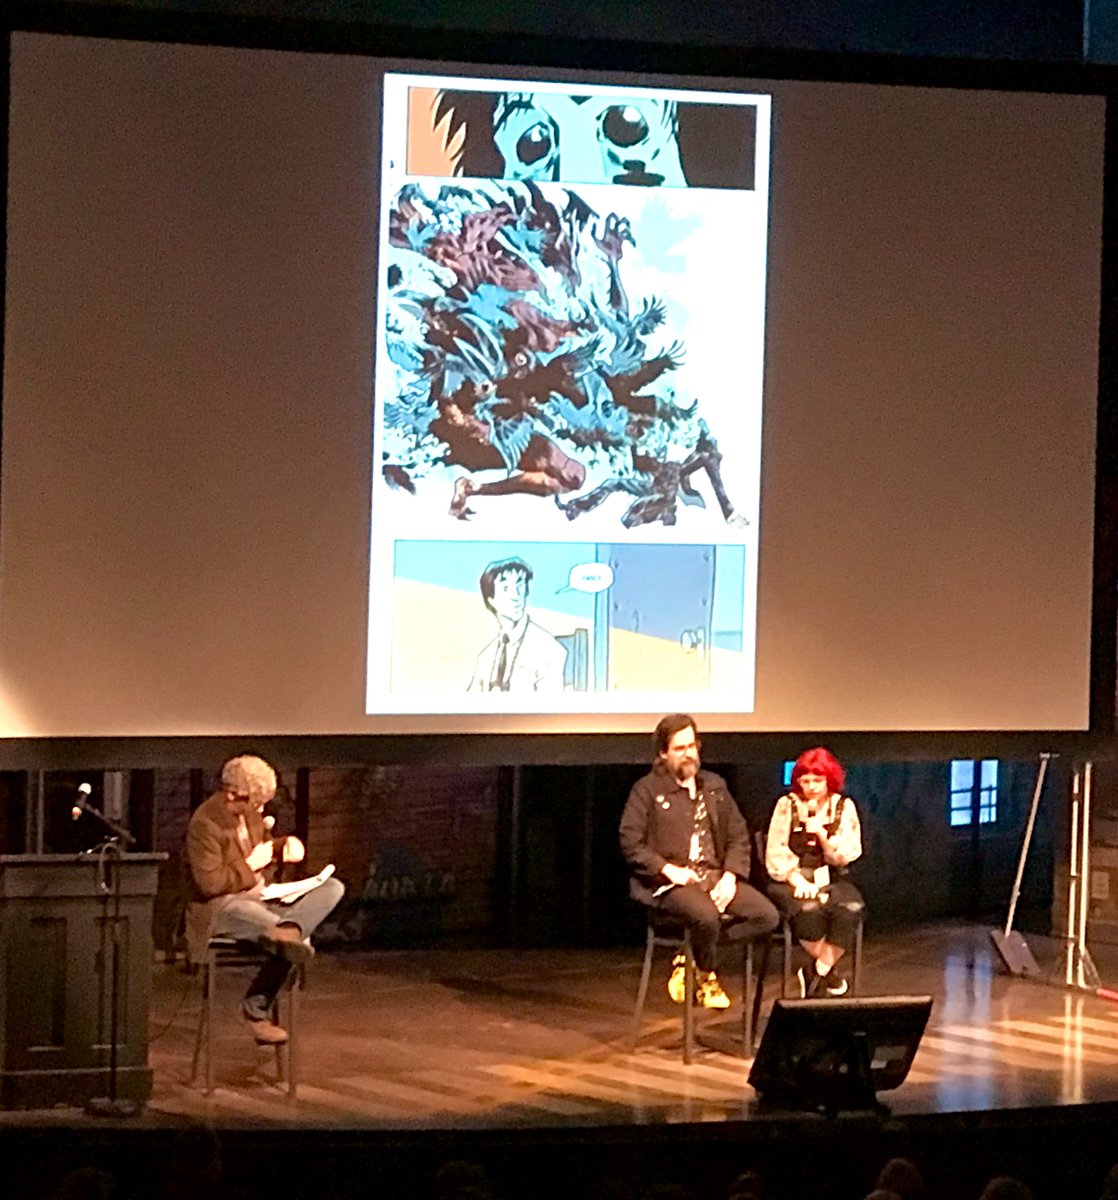 “Courage and time are the two things I find I run out of... You can’t find more time but you can find more courage. The courage to fail. The courage to risk failing. The courage to ask the tough questions.”
@kellysue #cre8con2019